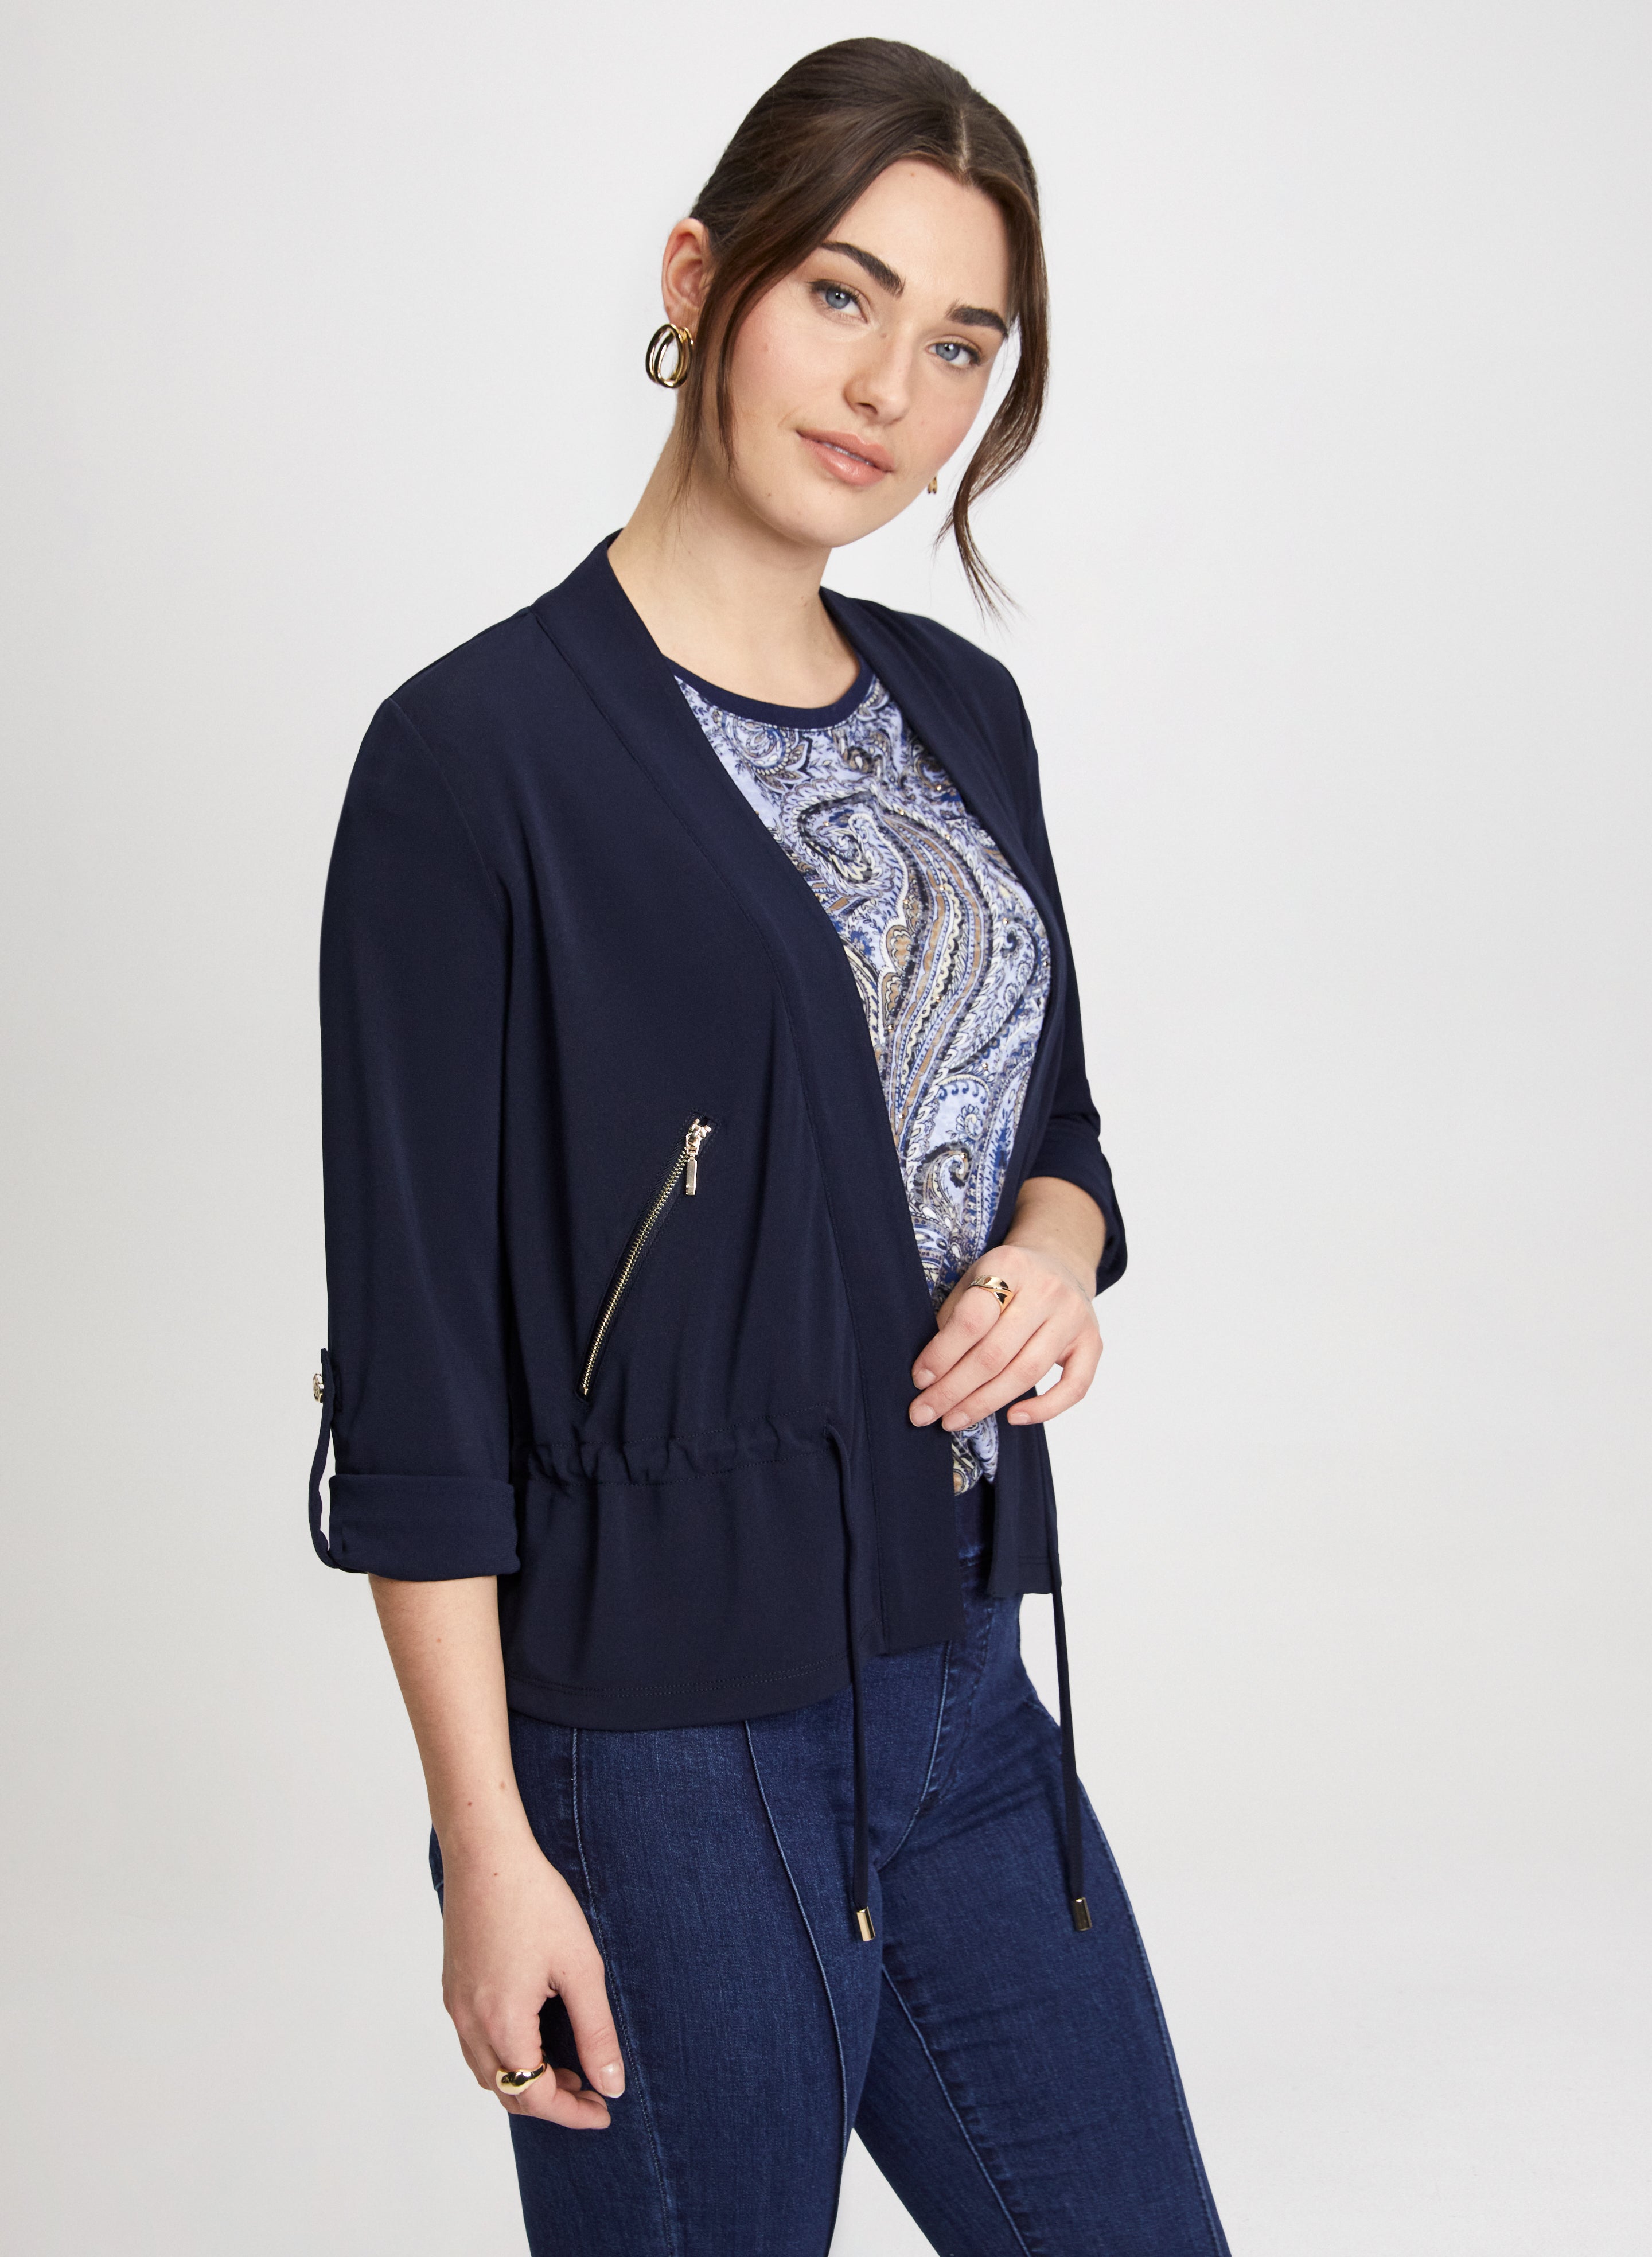 Drawstring Waist Cover Up Top